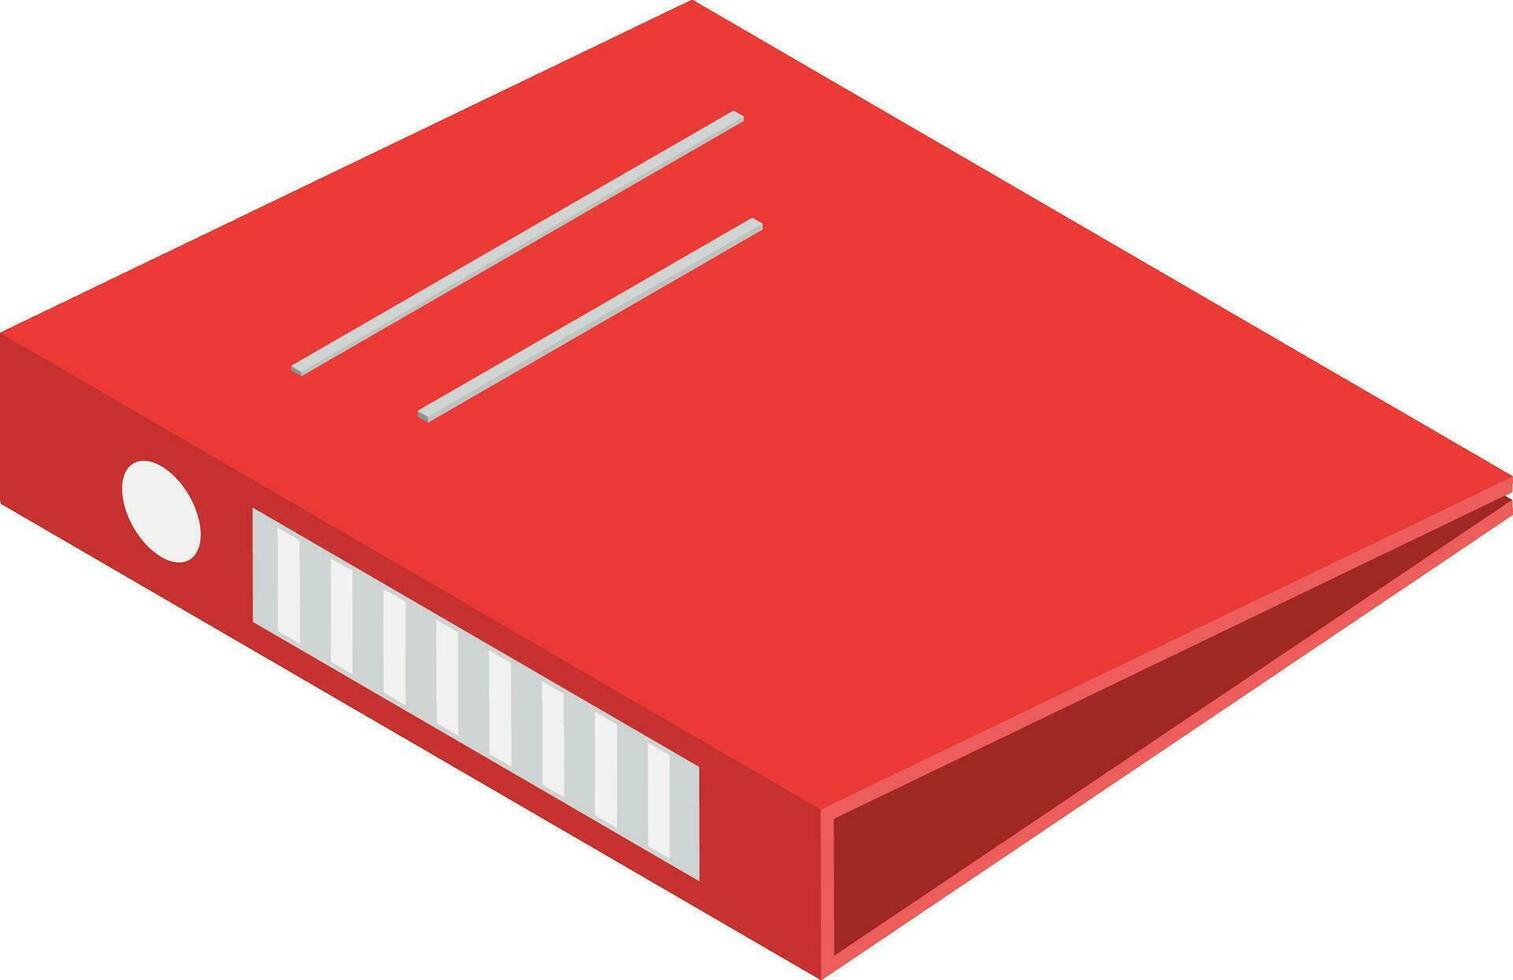 Ring Binder icon in red color. vector